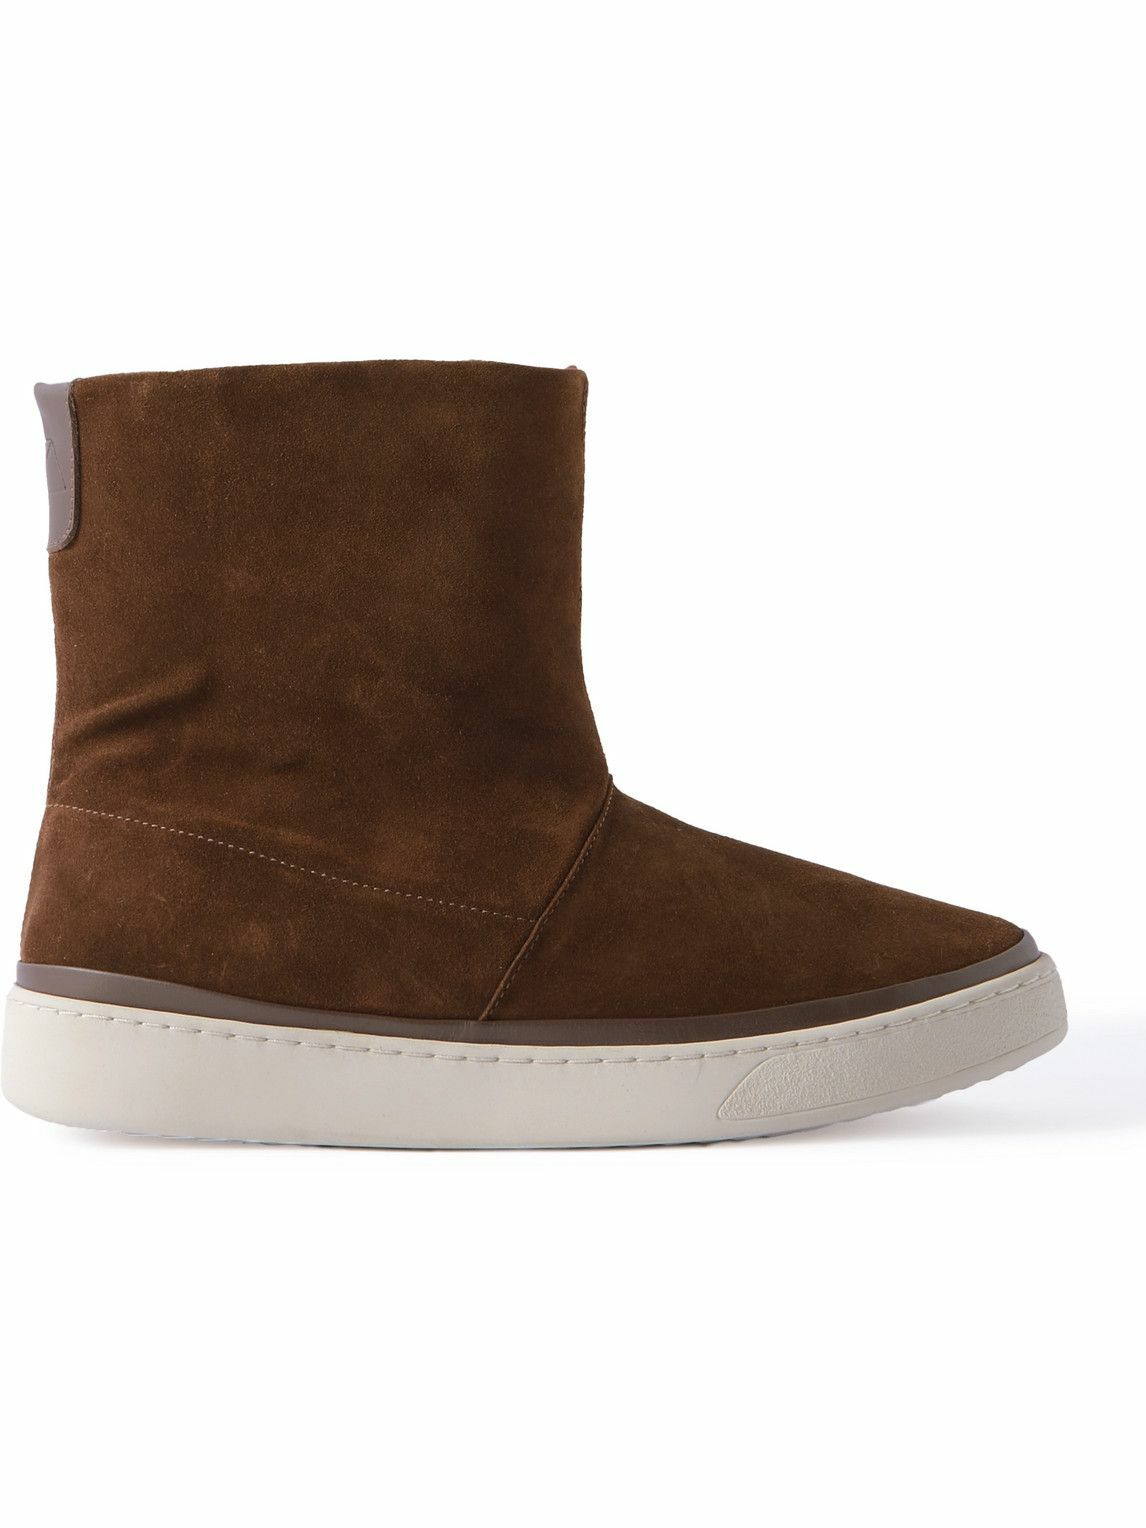 Photo: Mulo - Waxed Shearling-Lined Suede Slipper - Brown